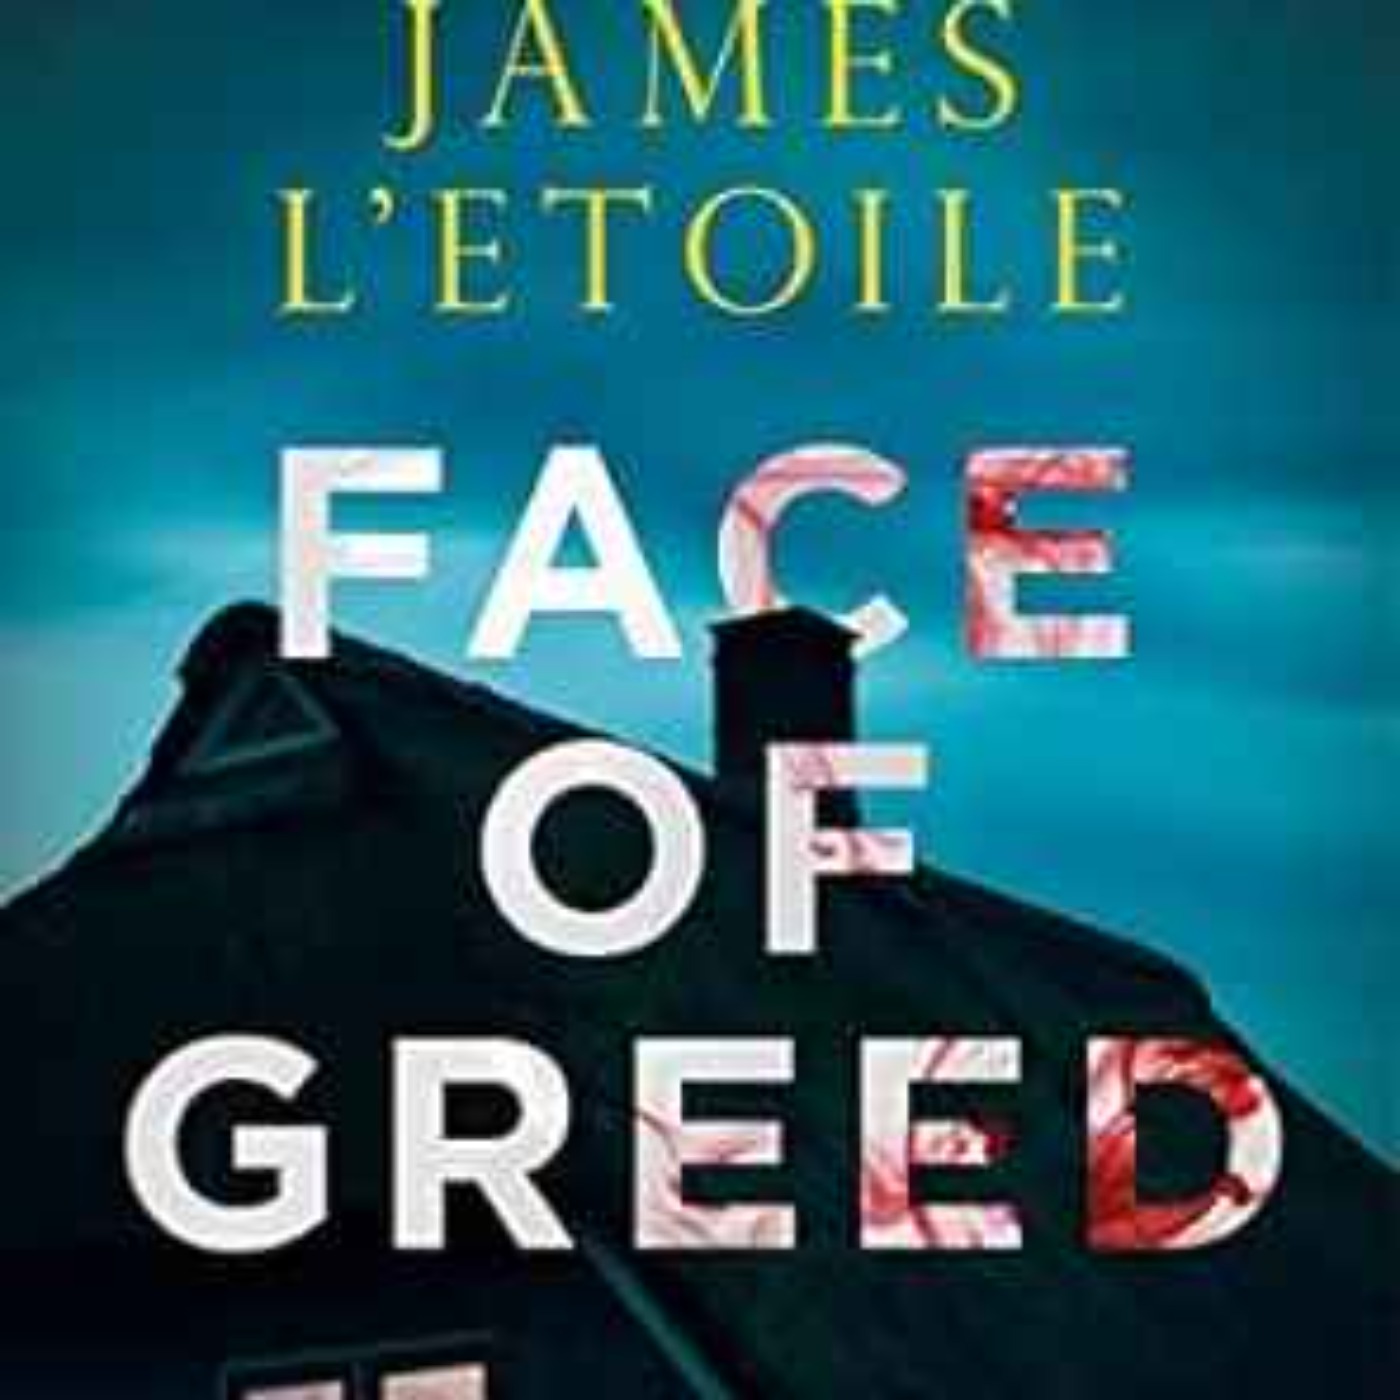 James L'Etoile - Face of Greed